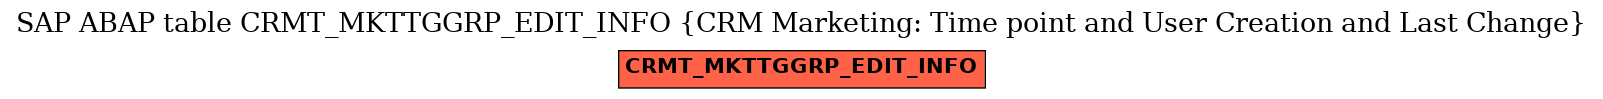 E-R Diagram for table CRMT_MKTTGGRP_EDIT_INFO (CRM Marketing: Time point and User Creation and Last Change)